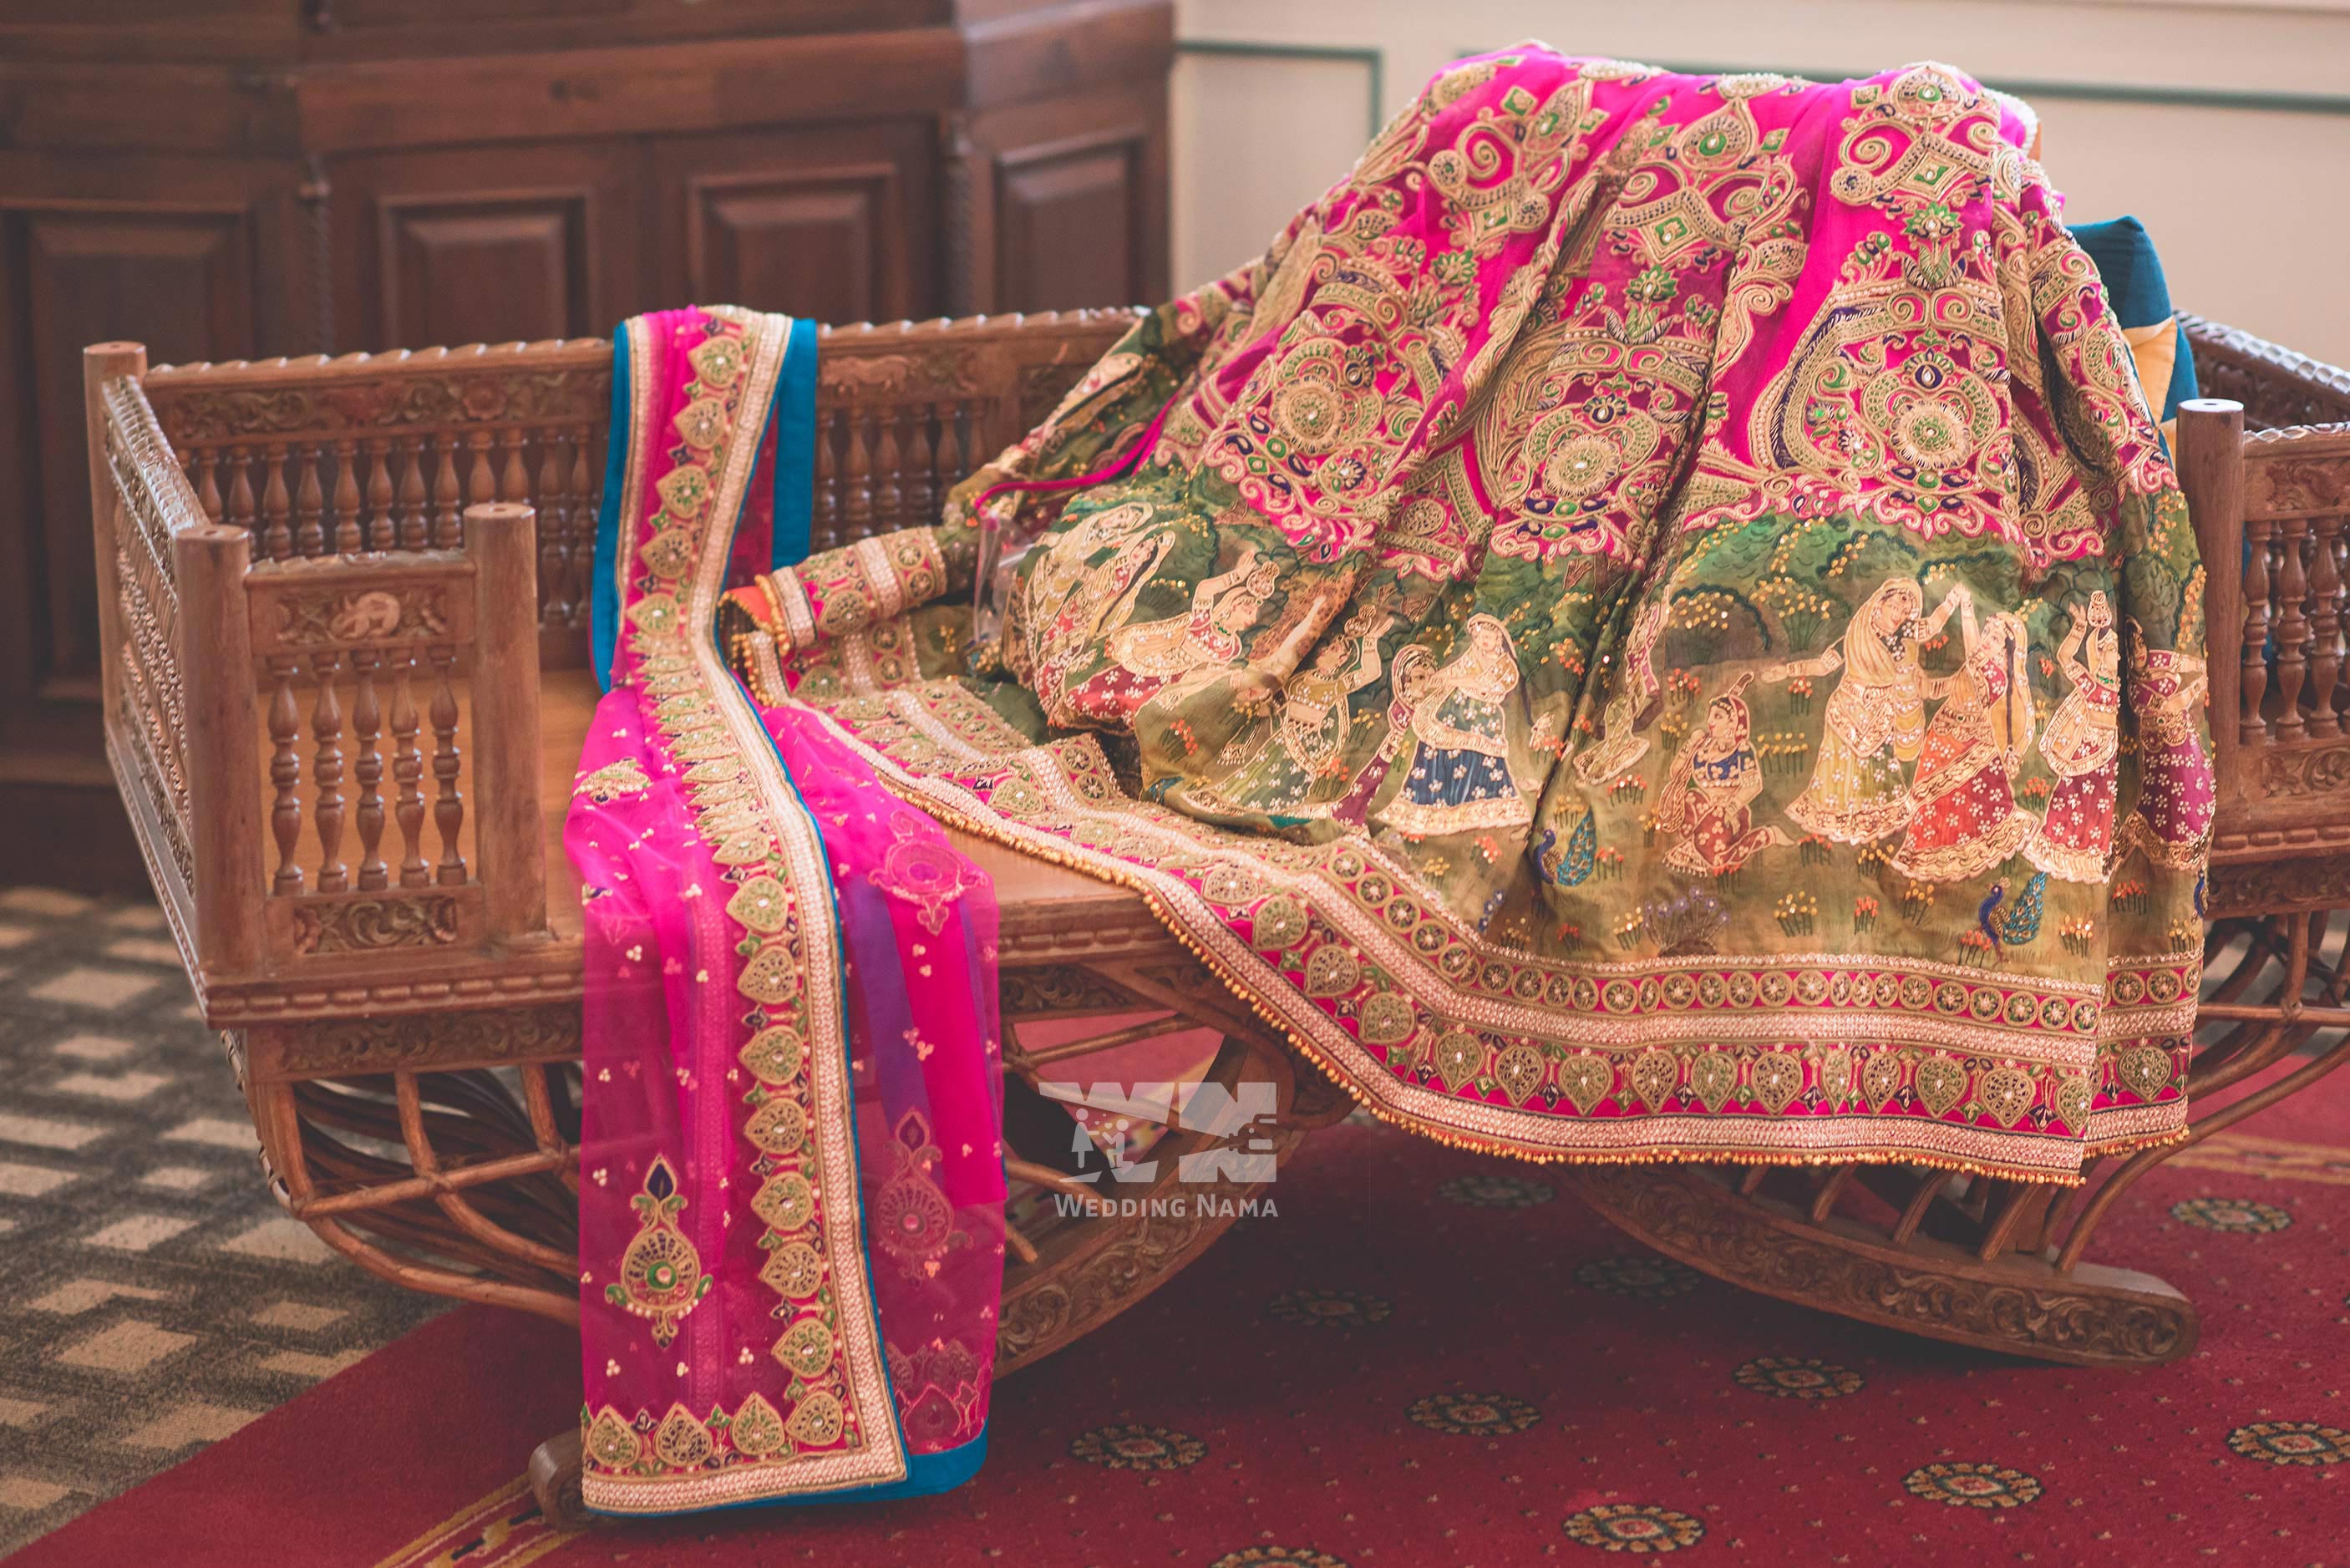 #23. This picture of one-a-kind lehenga (of designer Nishika Lulla) placed ...